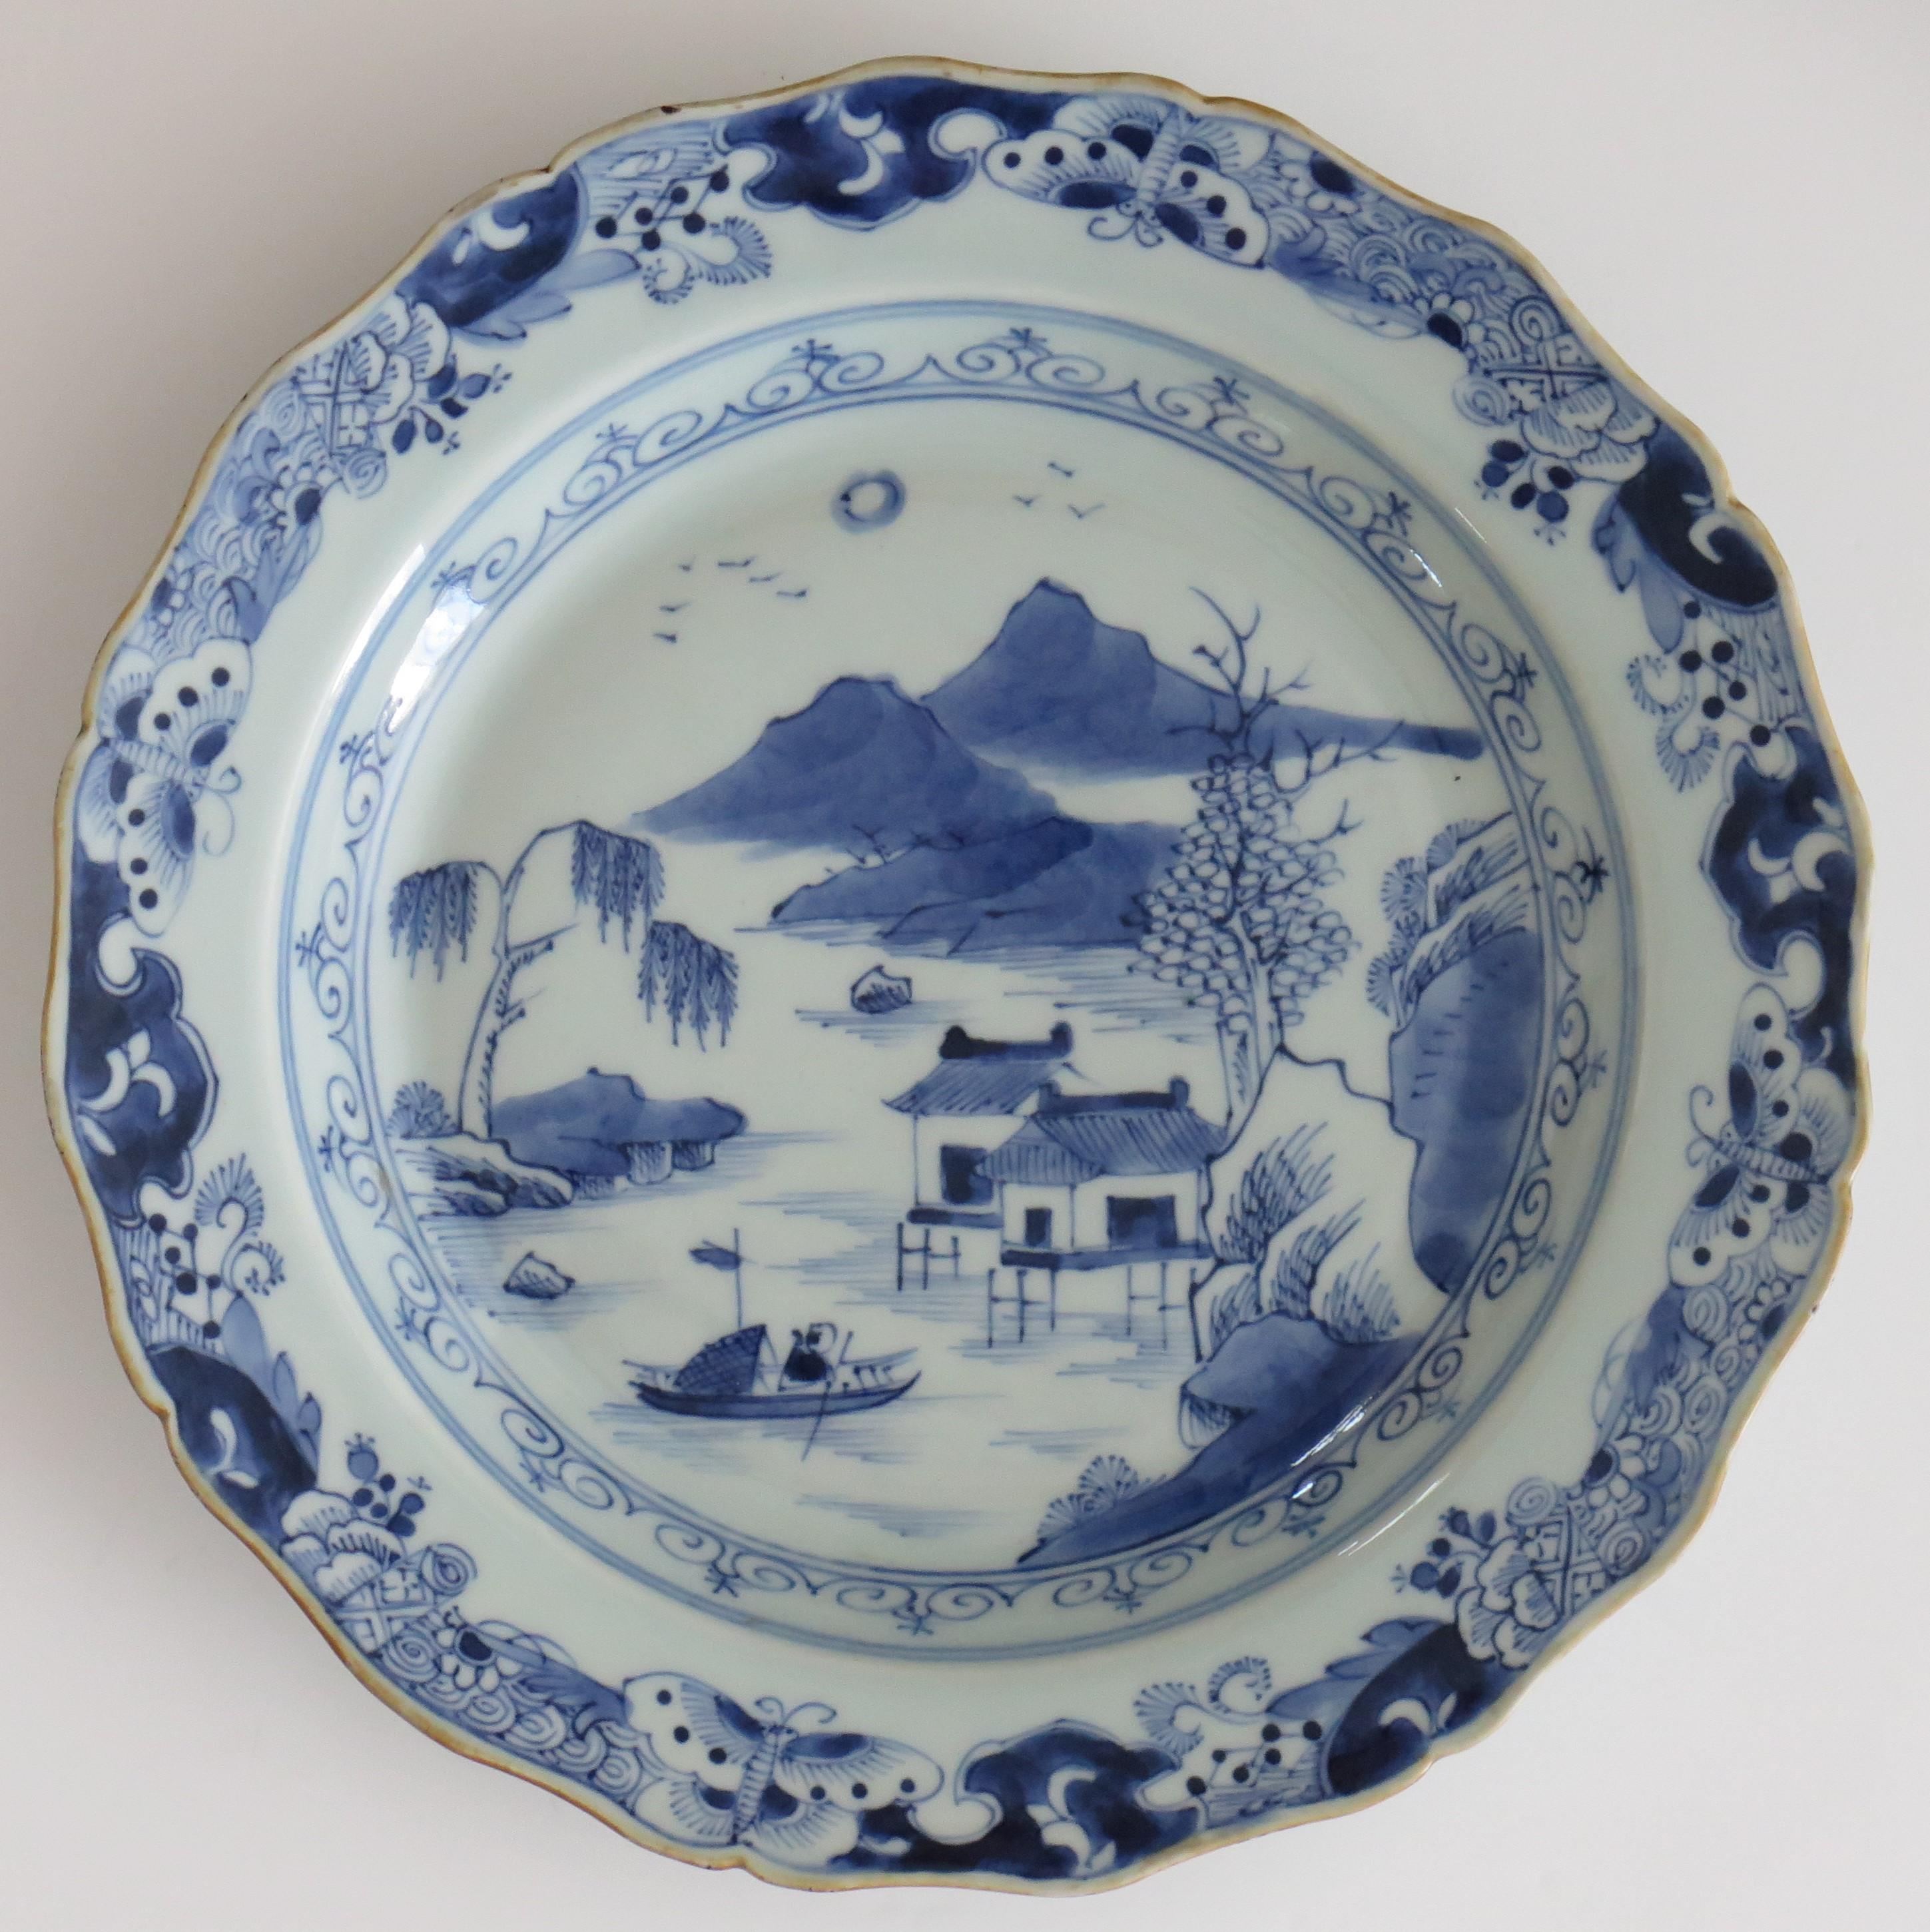 18th Century Chinese Export Porcelain Plate Blue and White Waterside Scene, Qing, circa 1770